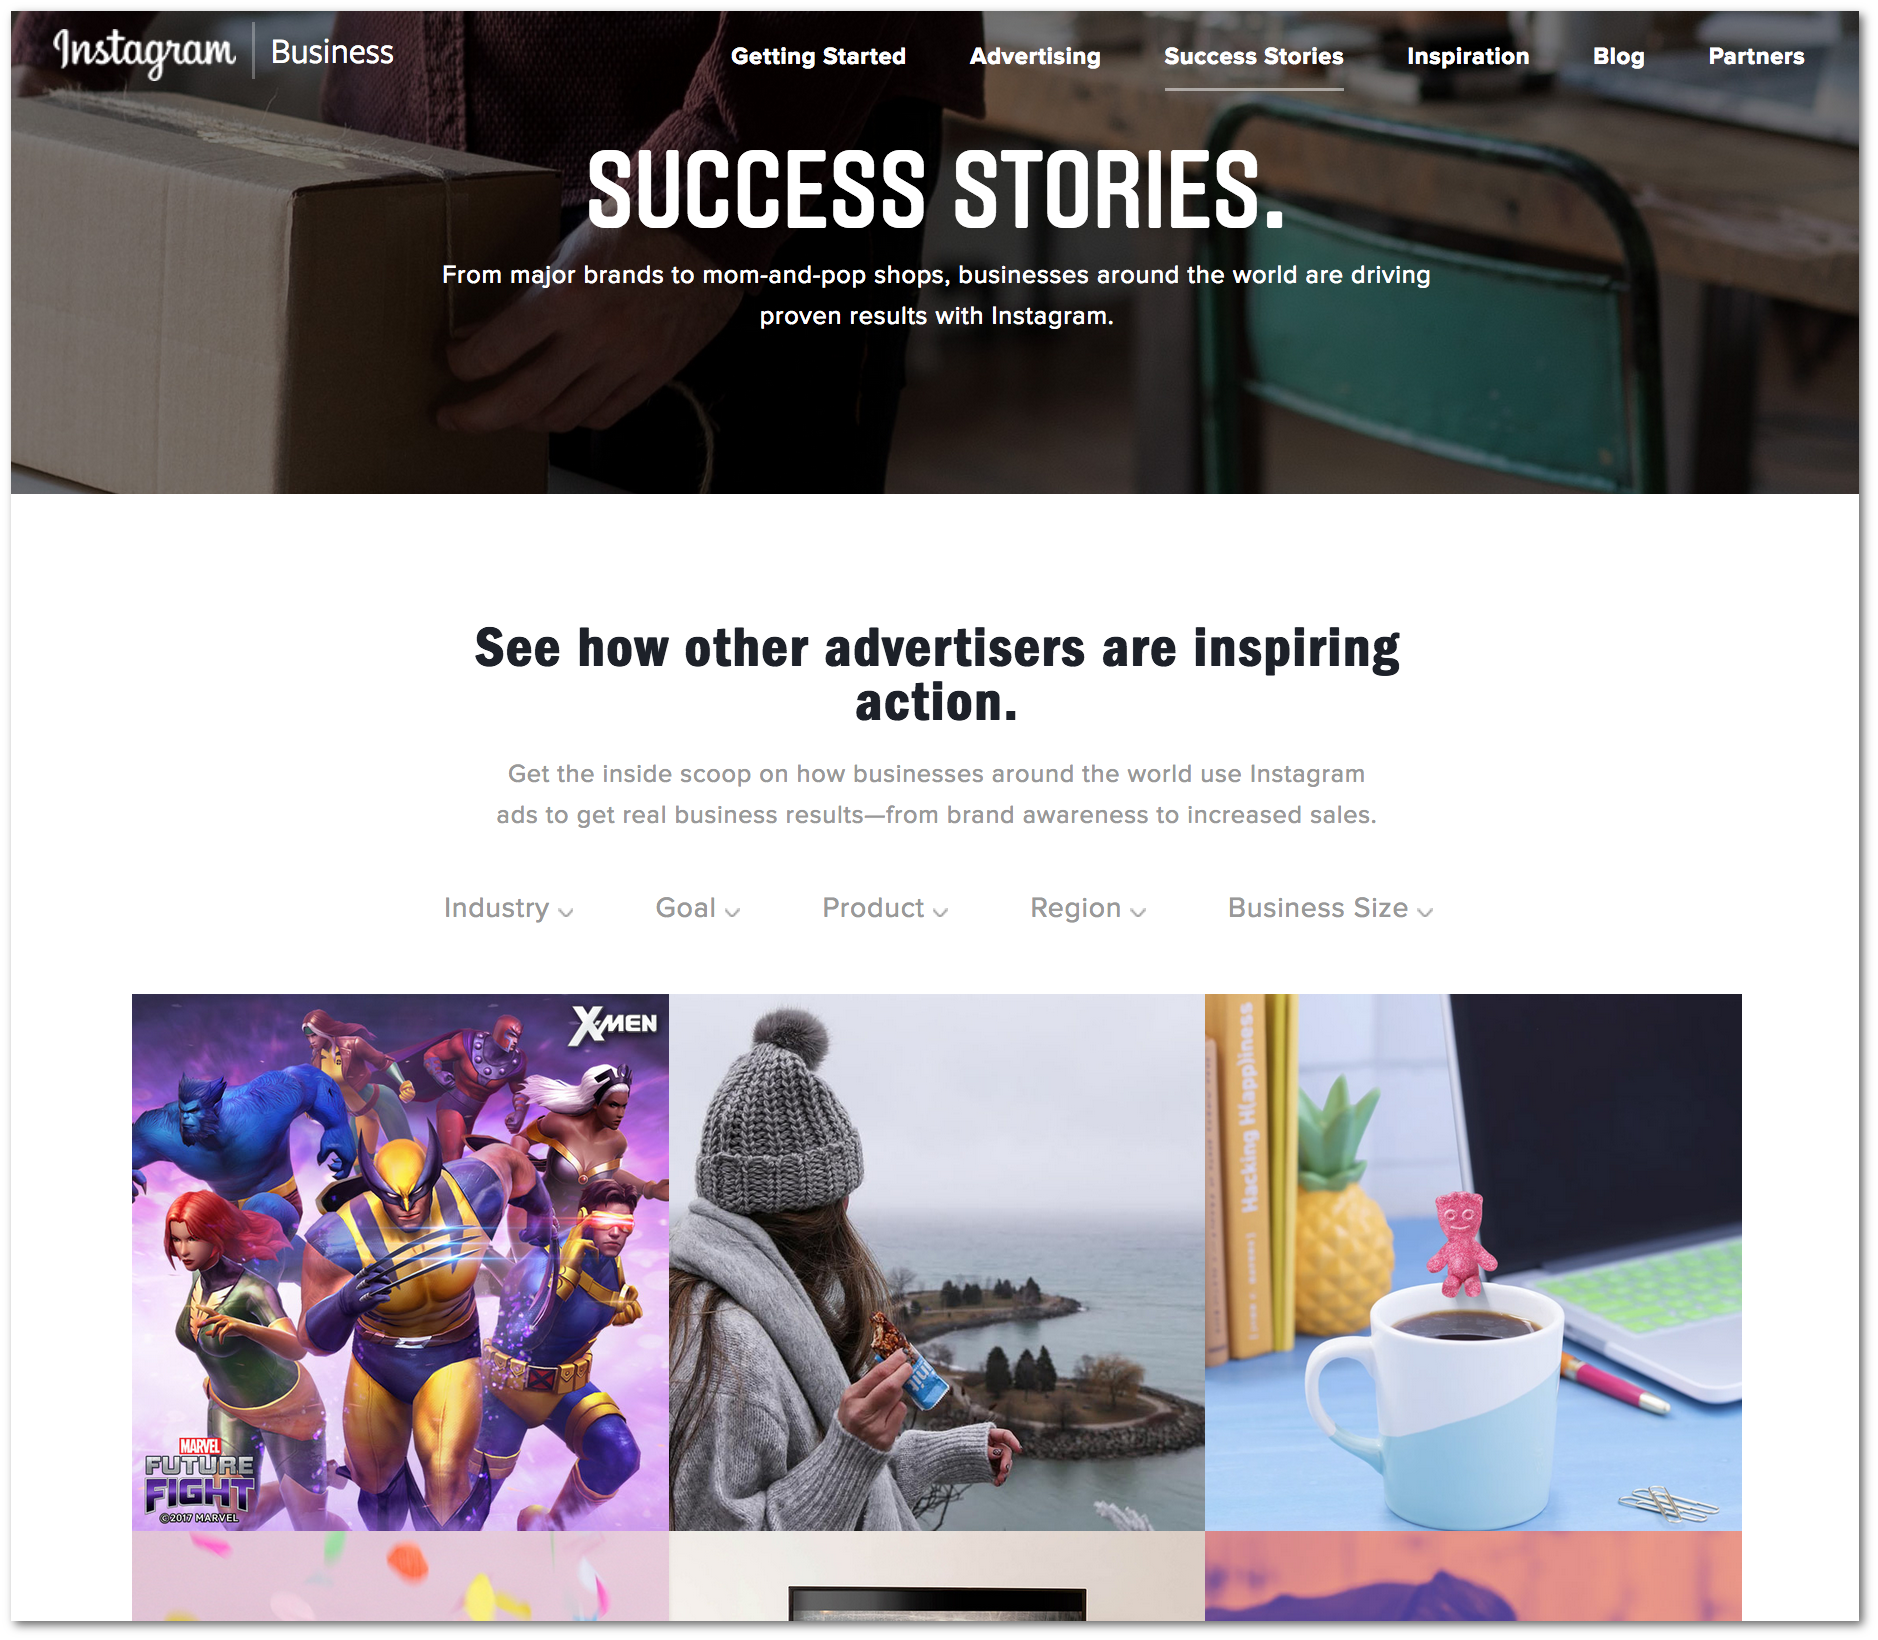 Instagram’s Success stories list case studies of customer companies. The subpages have a story - quotes - goals - solution outline.